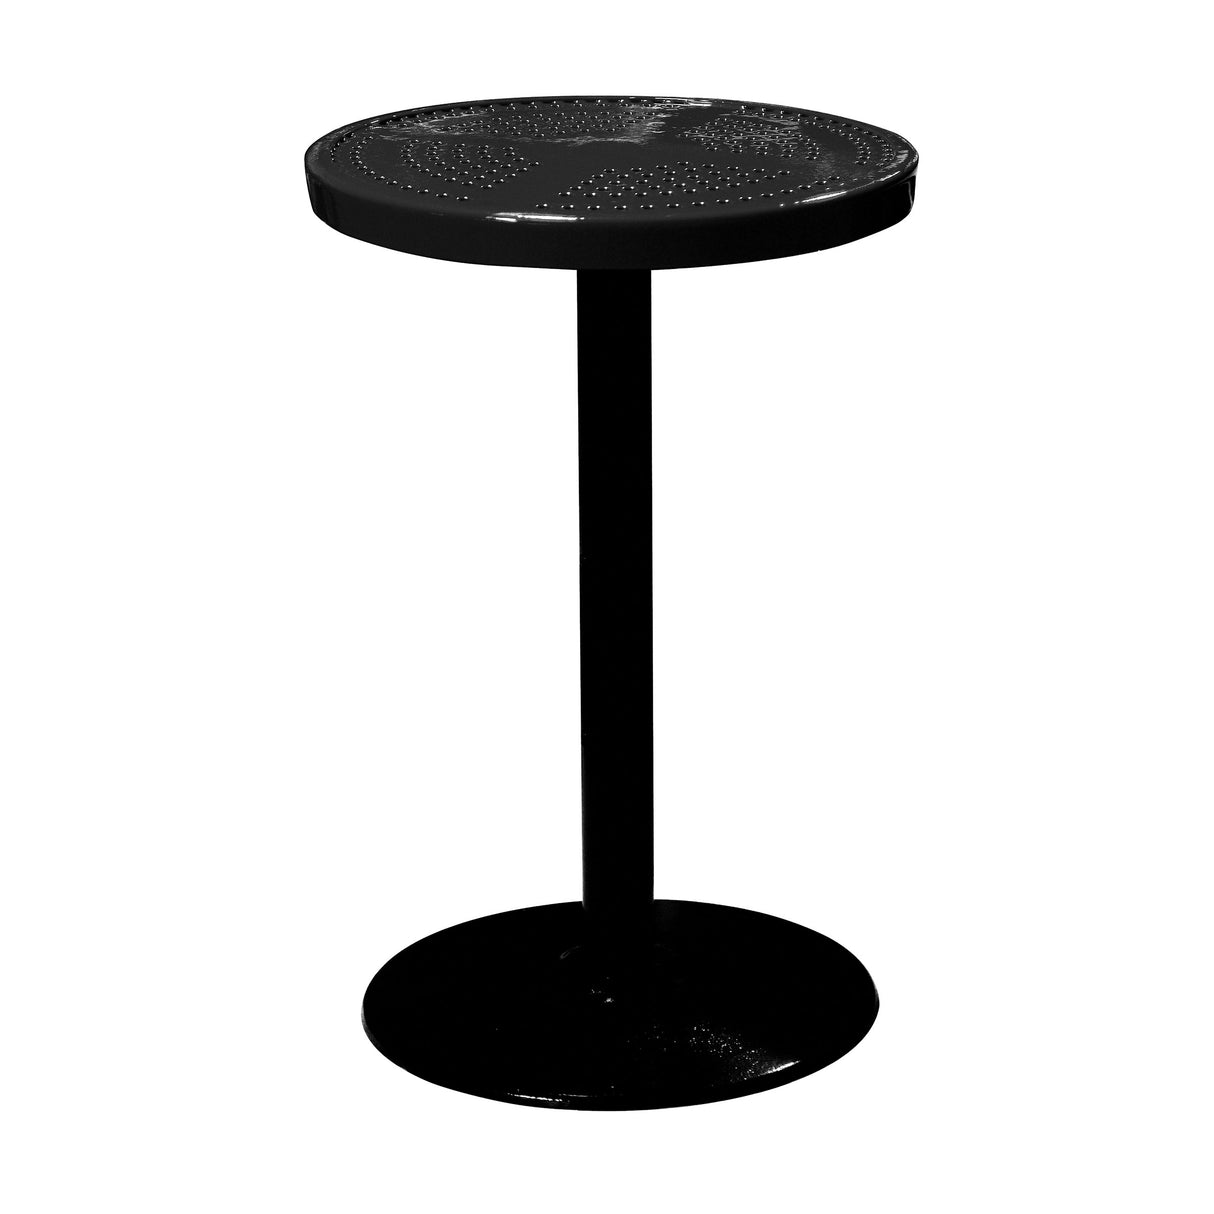 24˝ Perforated Pedestal Table